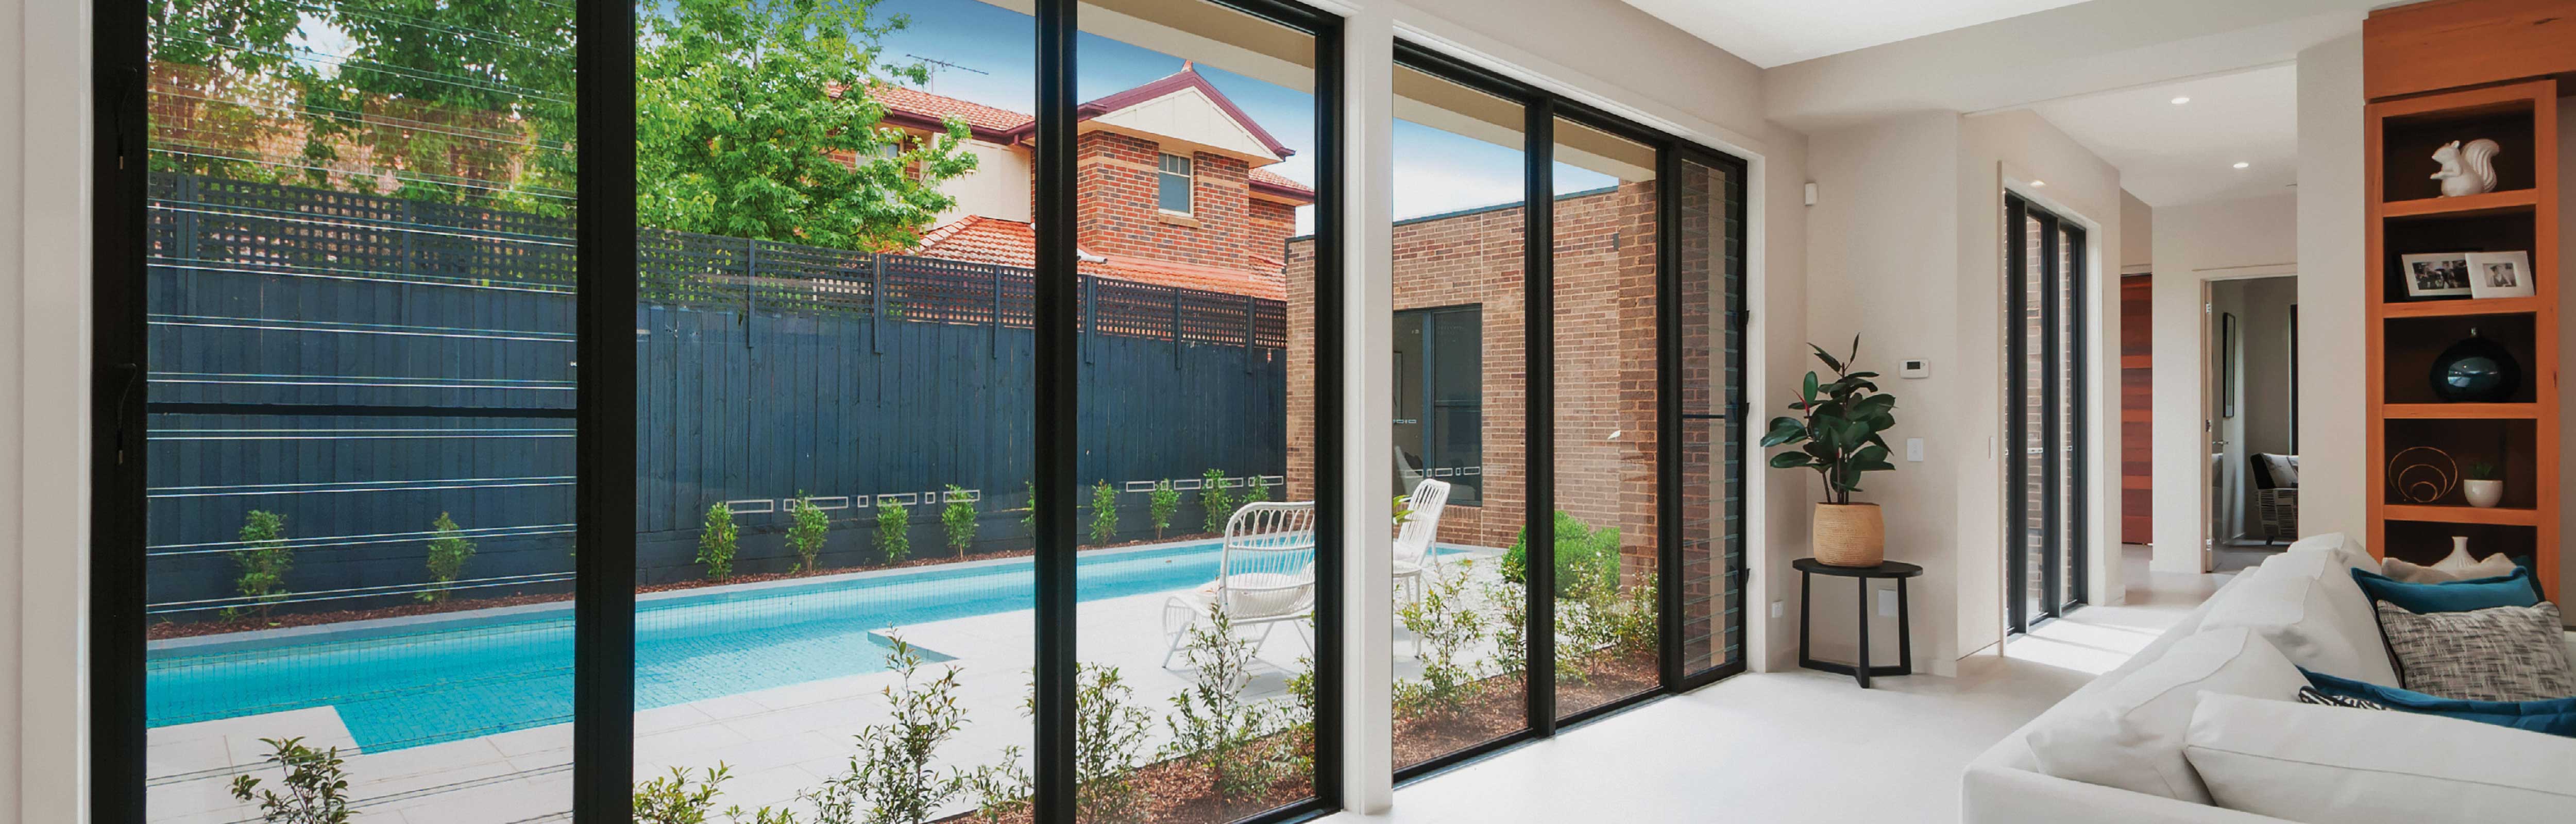 Black Frame Fixed Windows and Louvre Windows provide a view of swimming pool